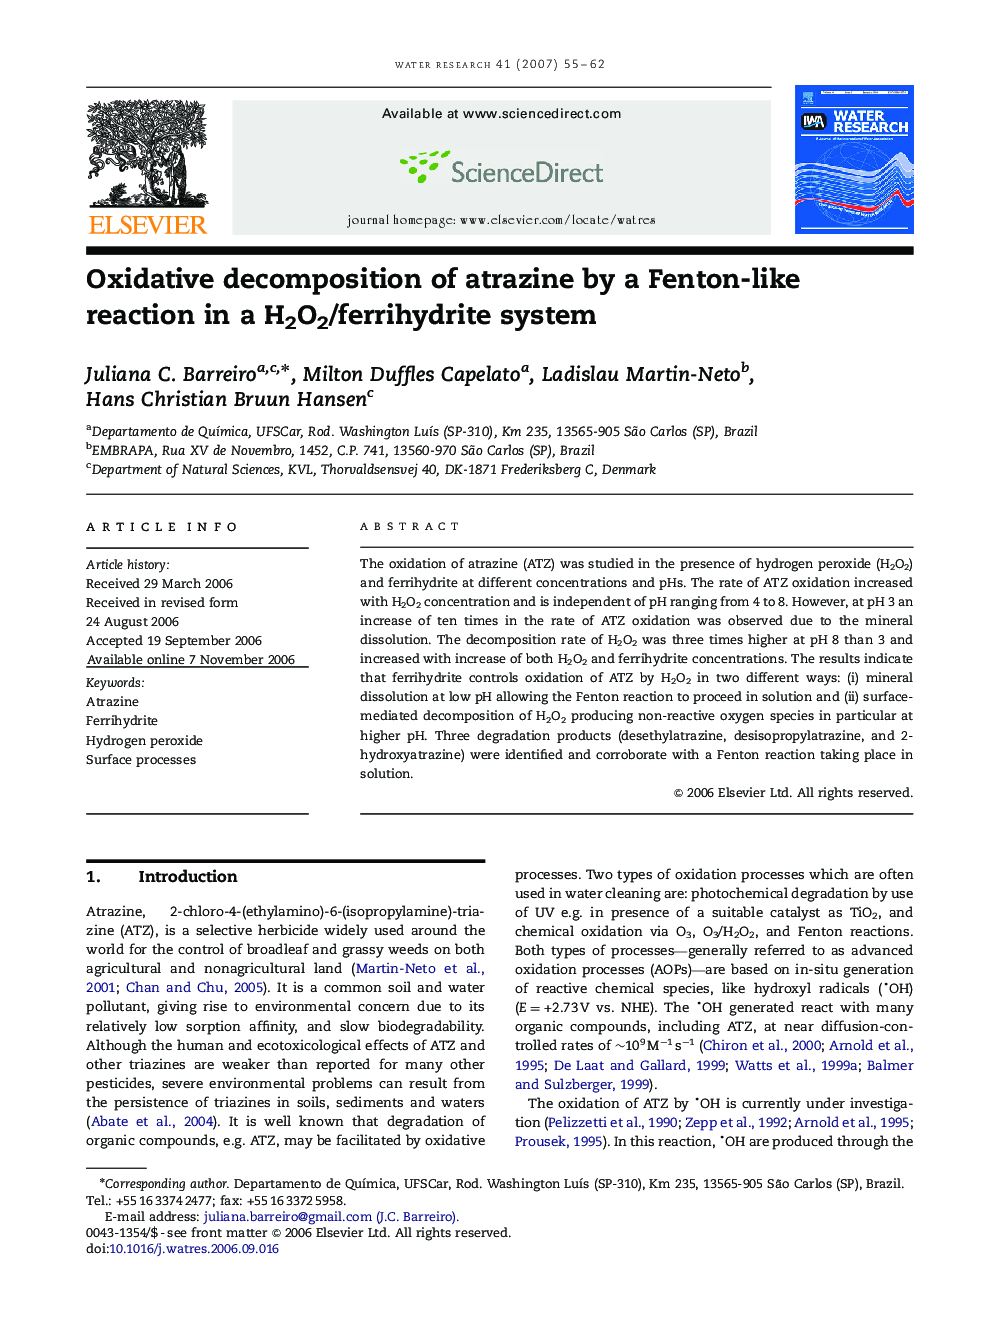 Oxidative decomposition of atrazine by a Fenton-like reaction in a H2O2/ferrihydrite system